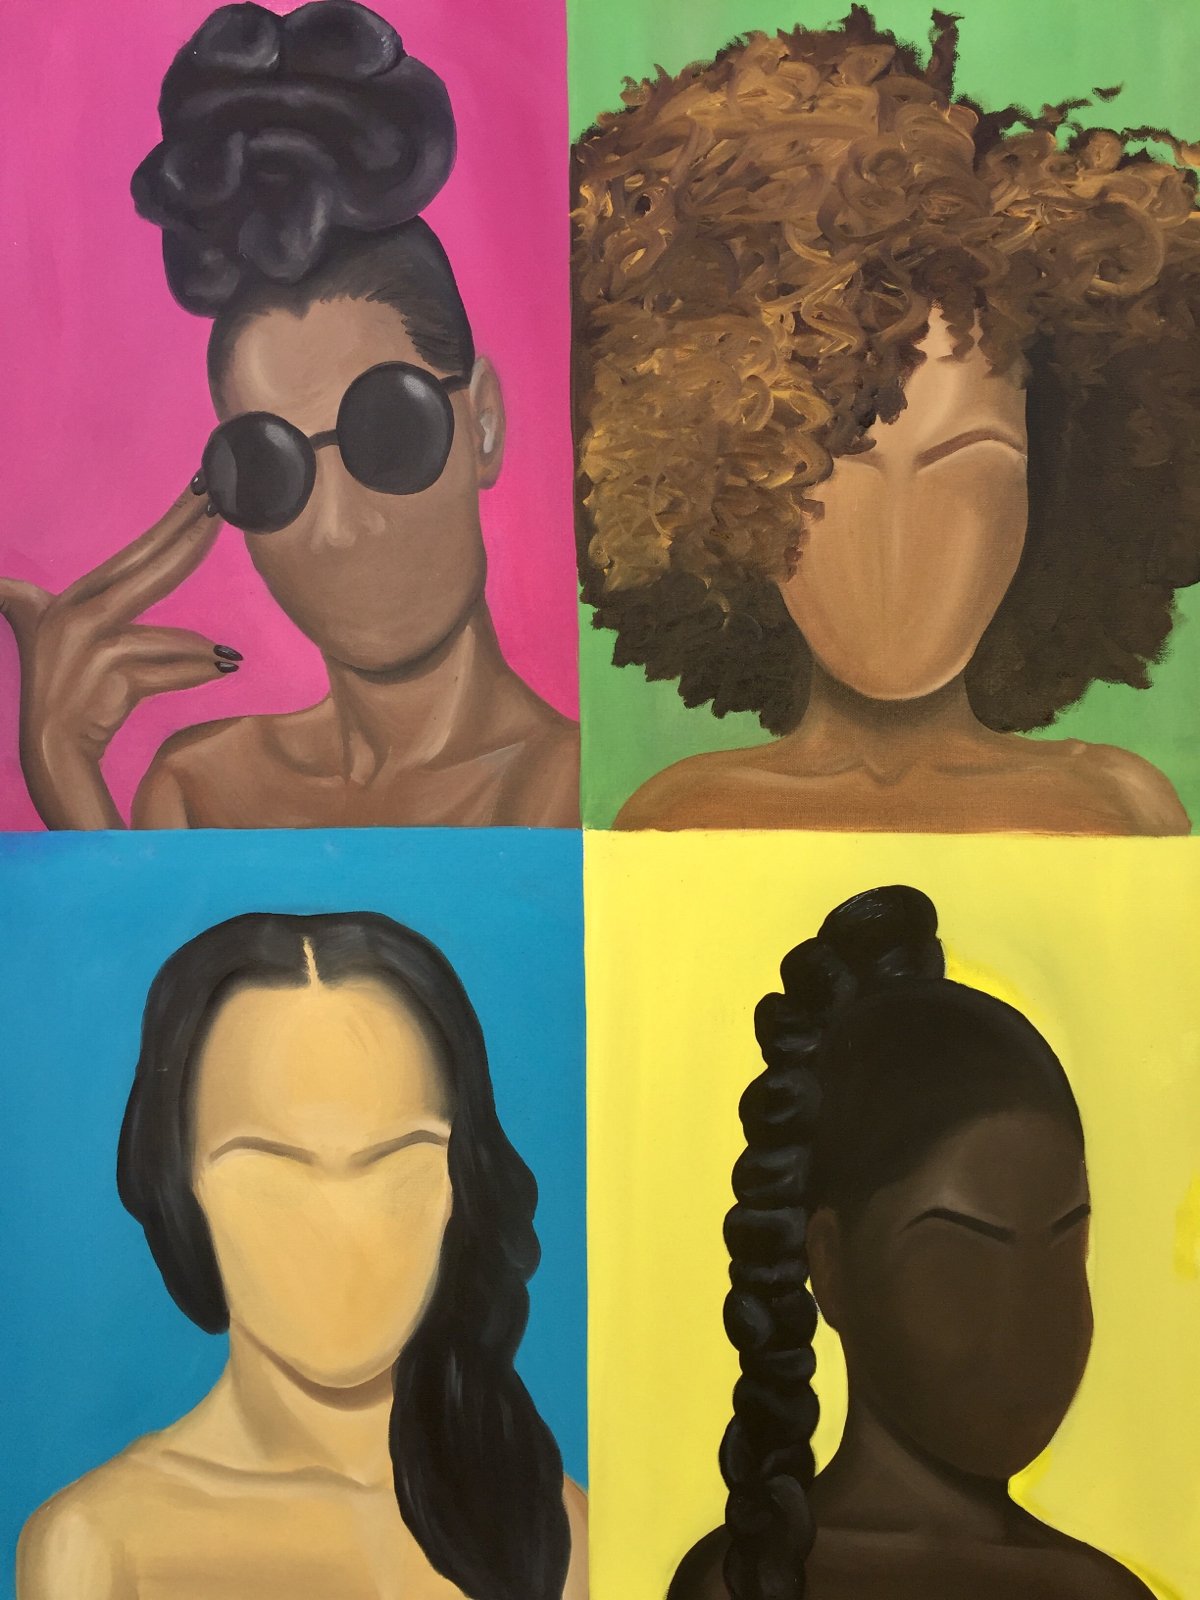 Image of "Four Colored Girls"